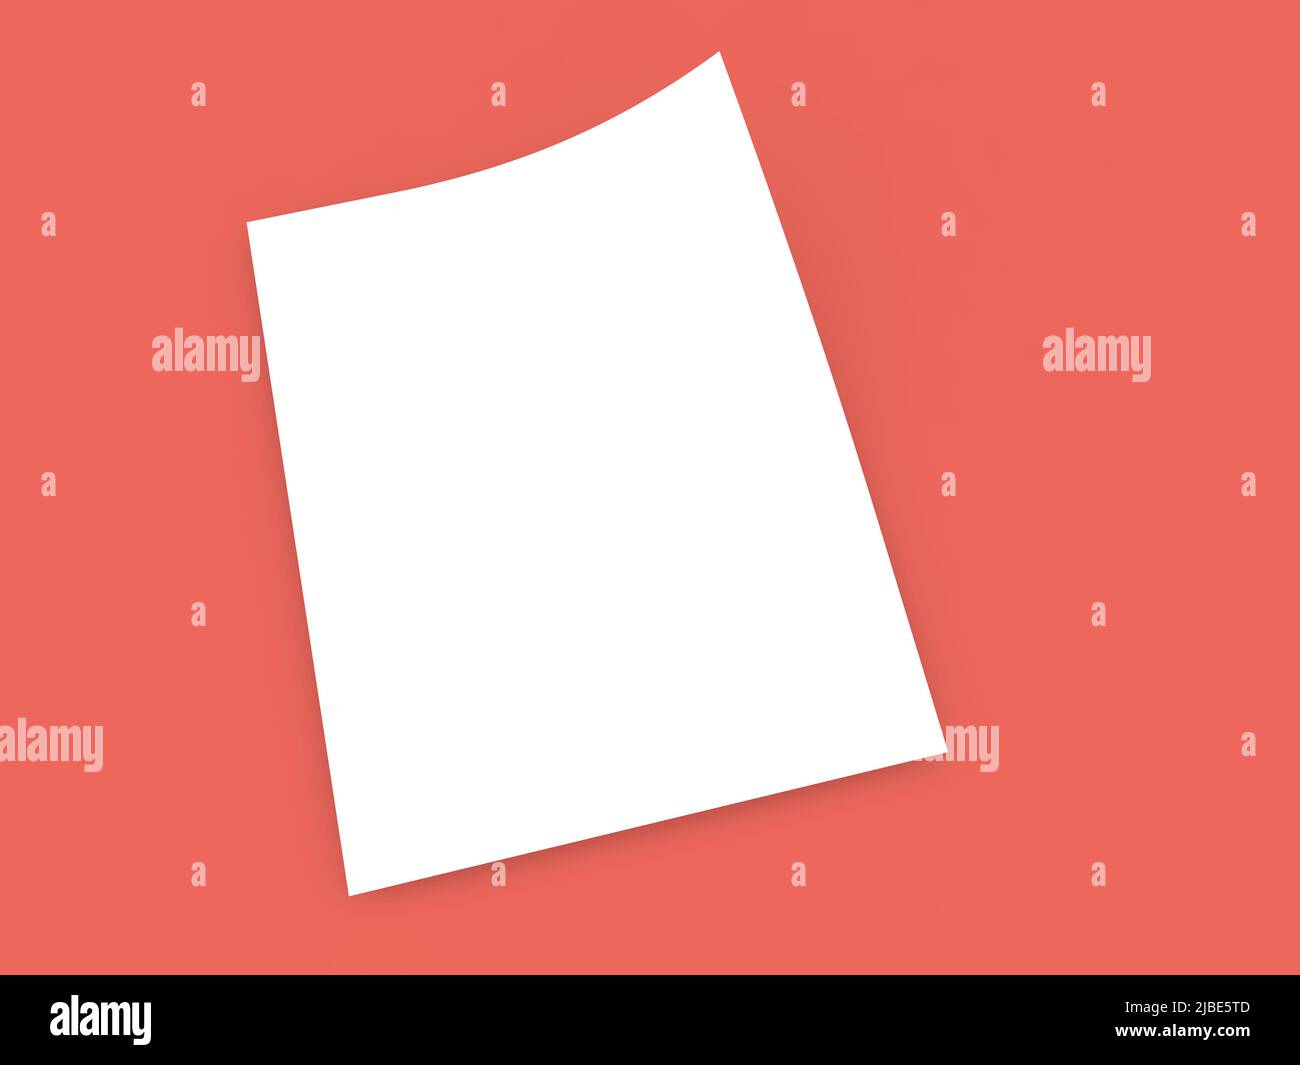 Sheet of white paper A4 for office on a red background. 3d render illustration. Stock Photo